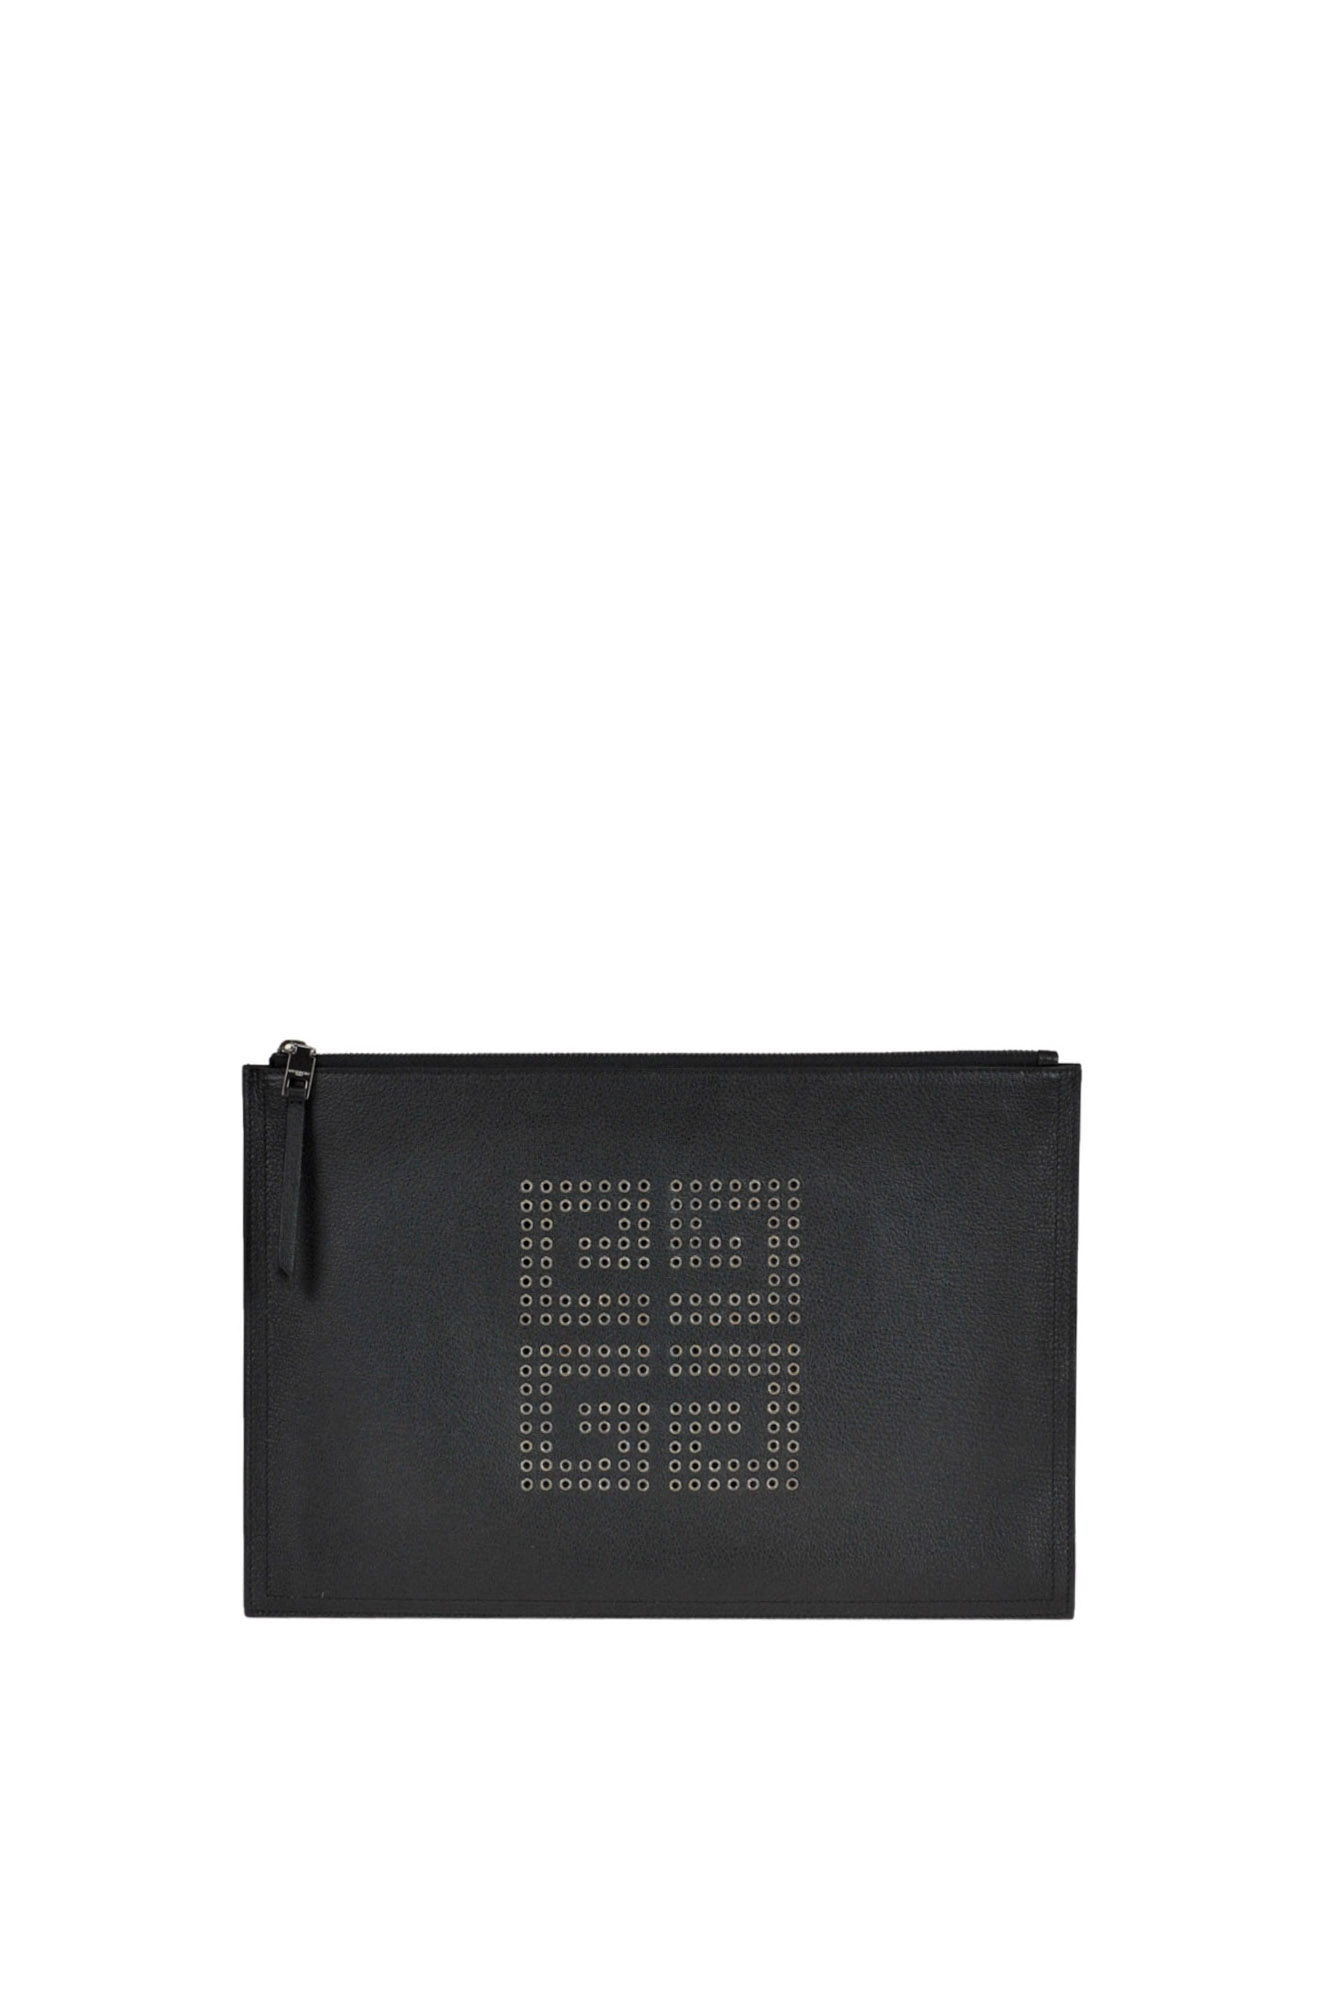 Givenchy Emblem Large Pouch In Black